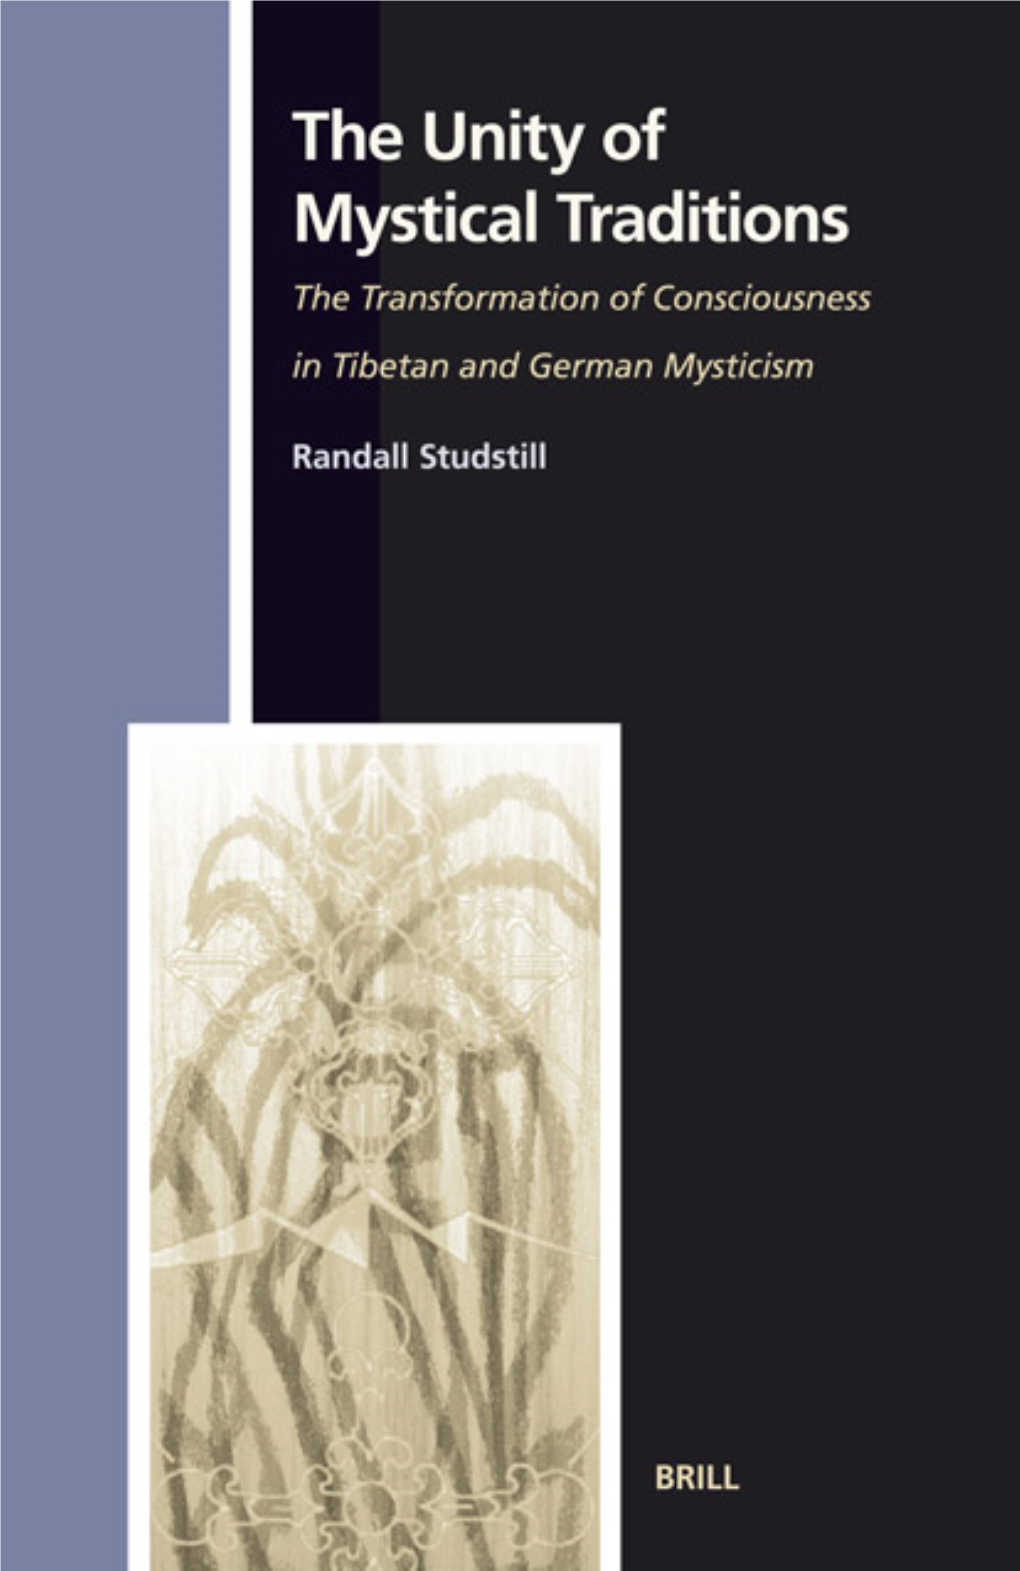 The Transformation of Consciousness in Tibetan and German Mysticism